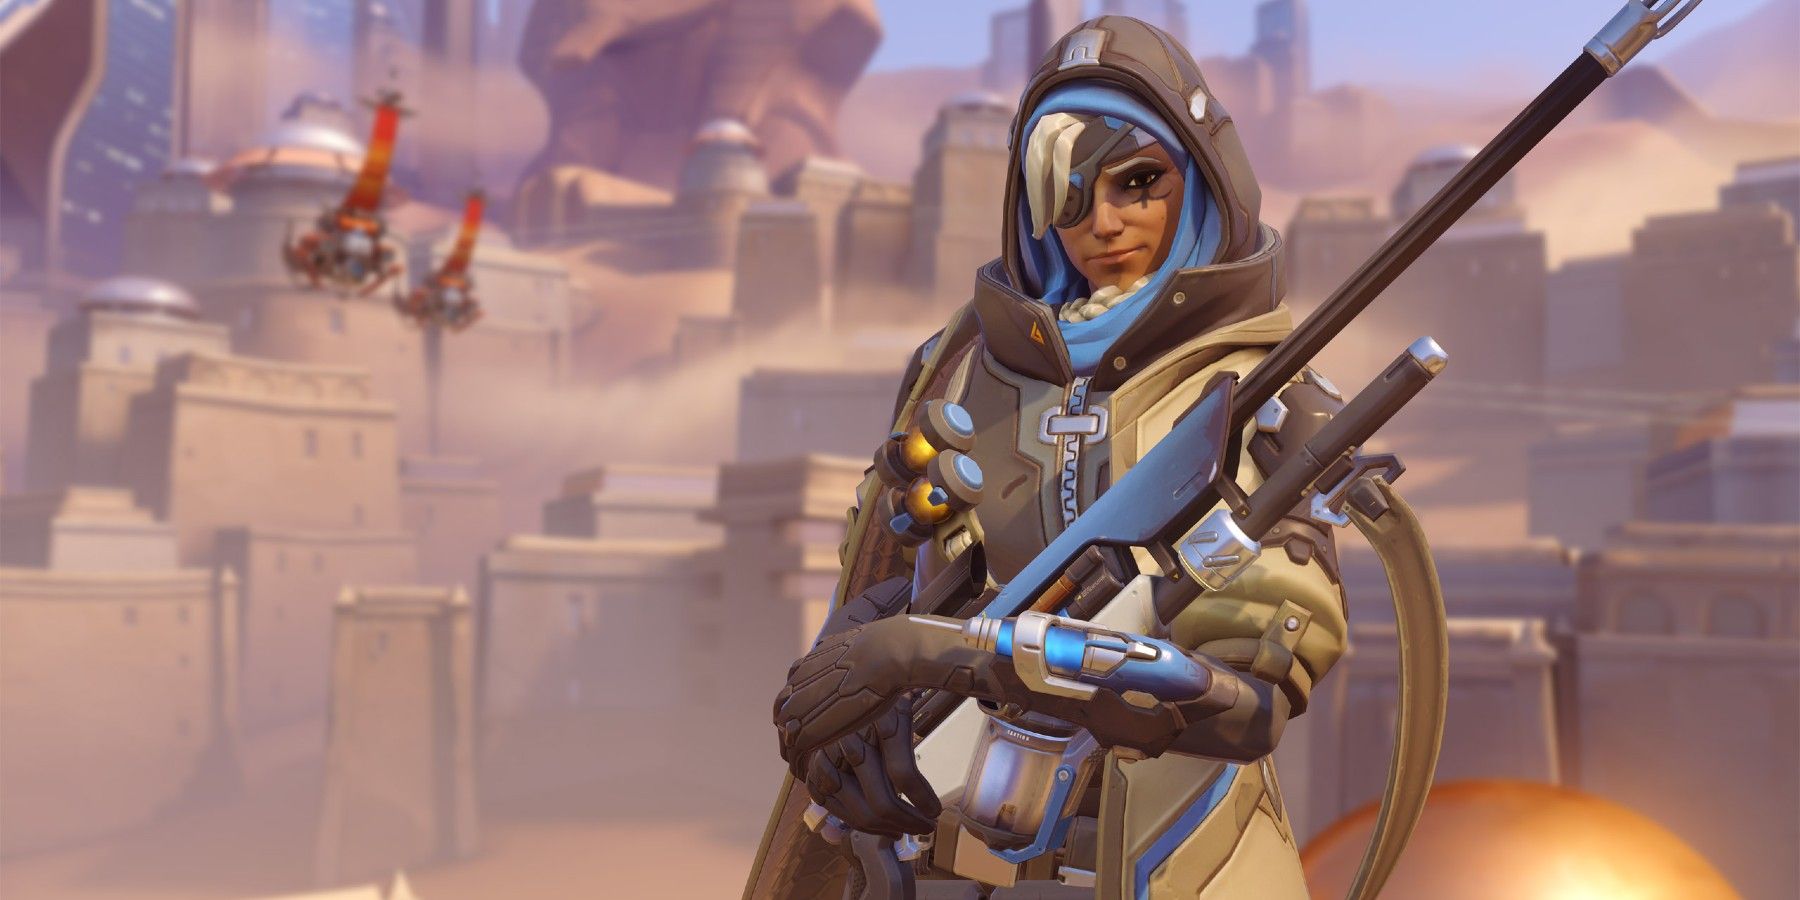 Hilarious Overwatch Clip Shows Ana Flying Better Than Pharah